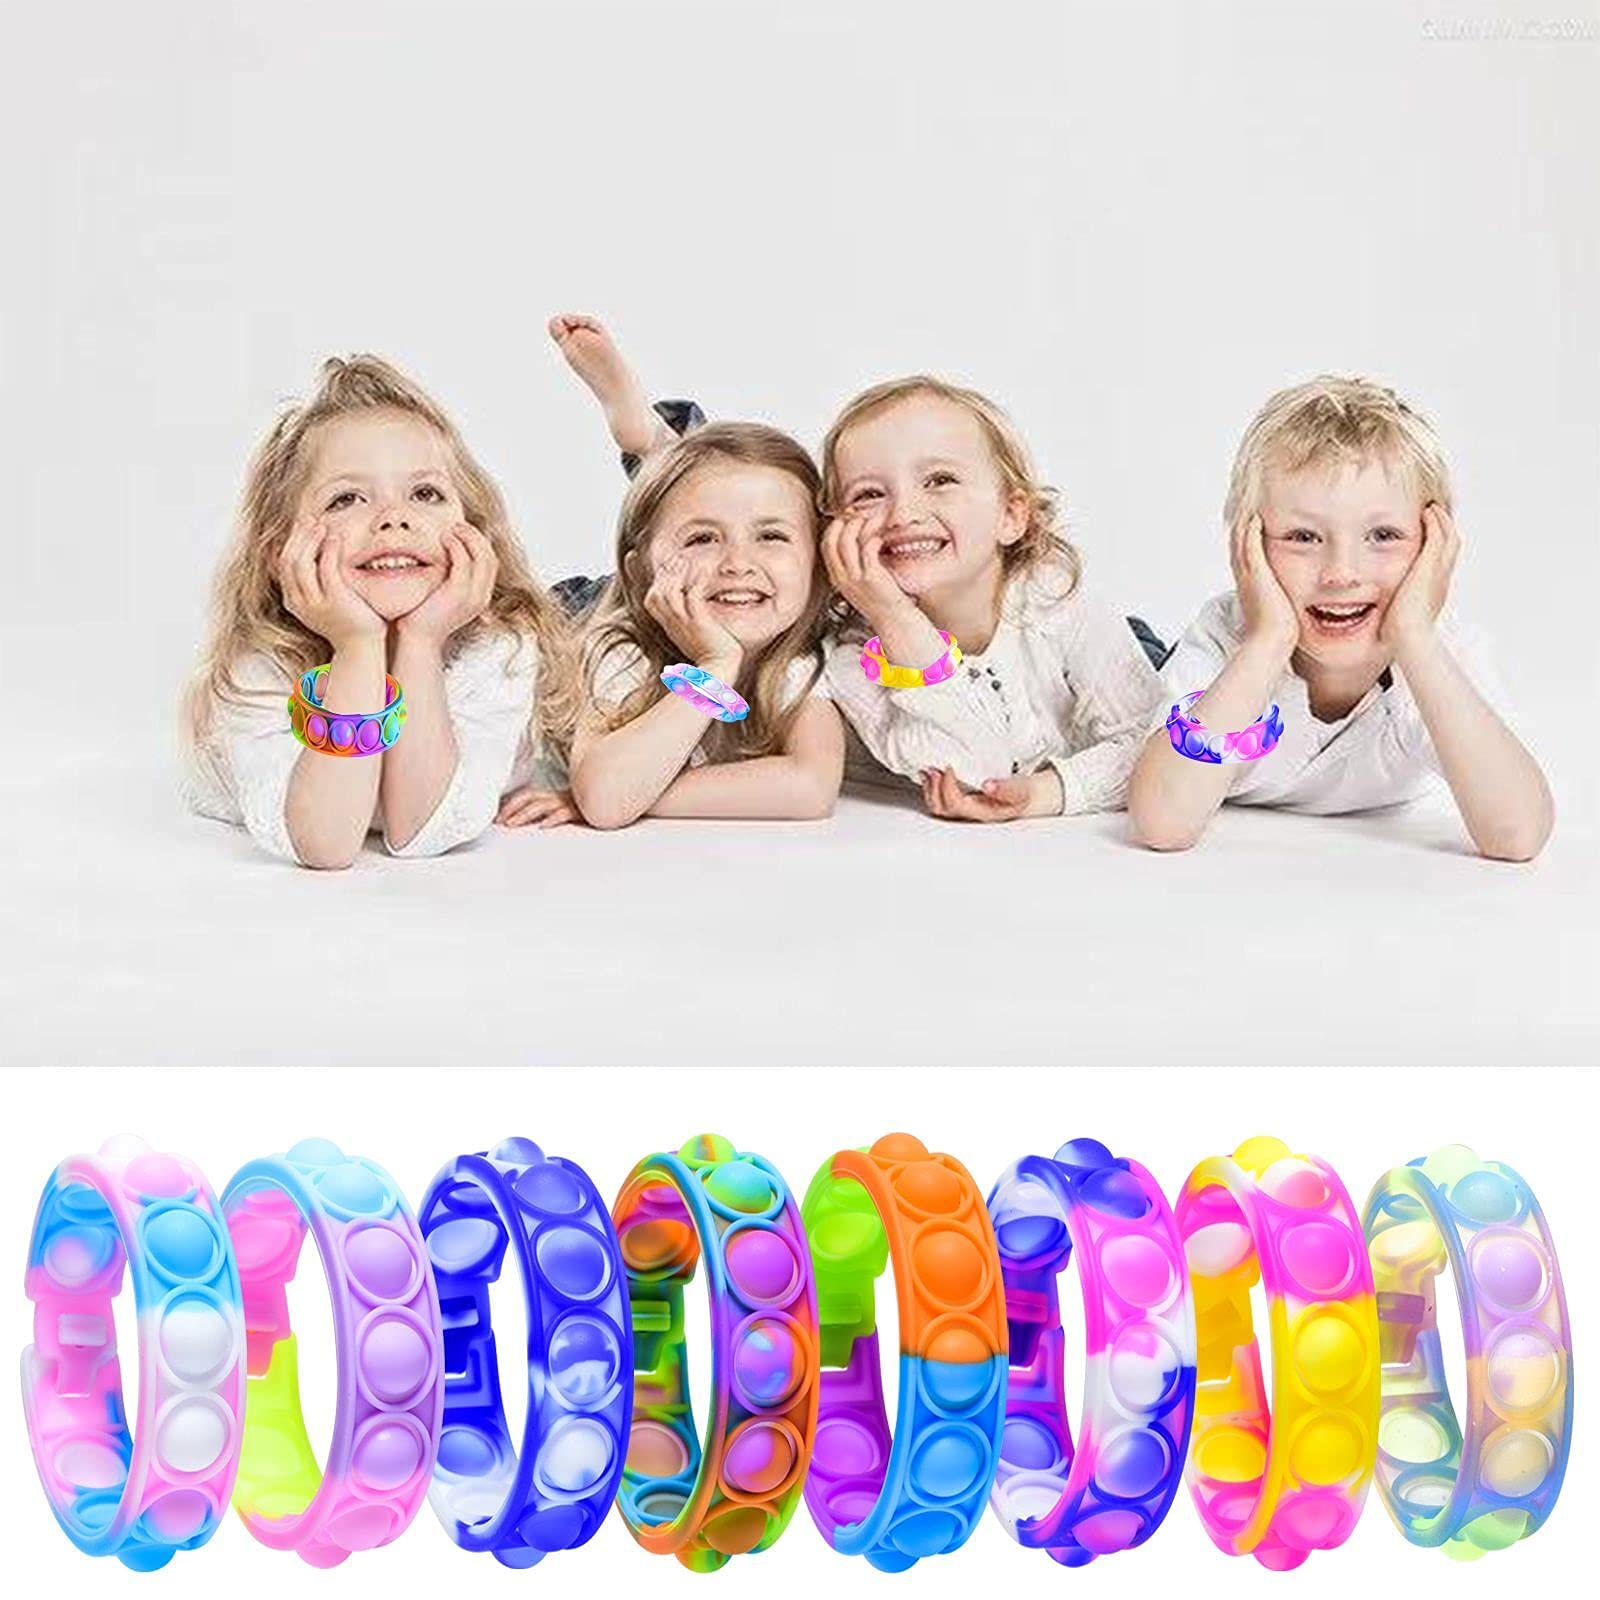 Zxhtwo 16 Pcs Pop Fidget Toy Fidget Bracelet, Wearable Push Poping Bubble Sensory Toys Stress Relief Finger Press Silicone Wristband for Kids and Adults ADHD ADD Autism Anxiety